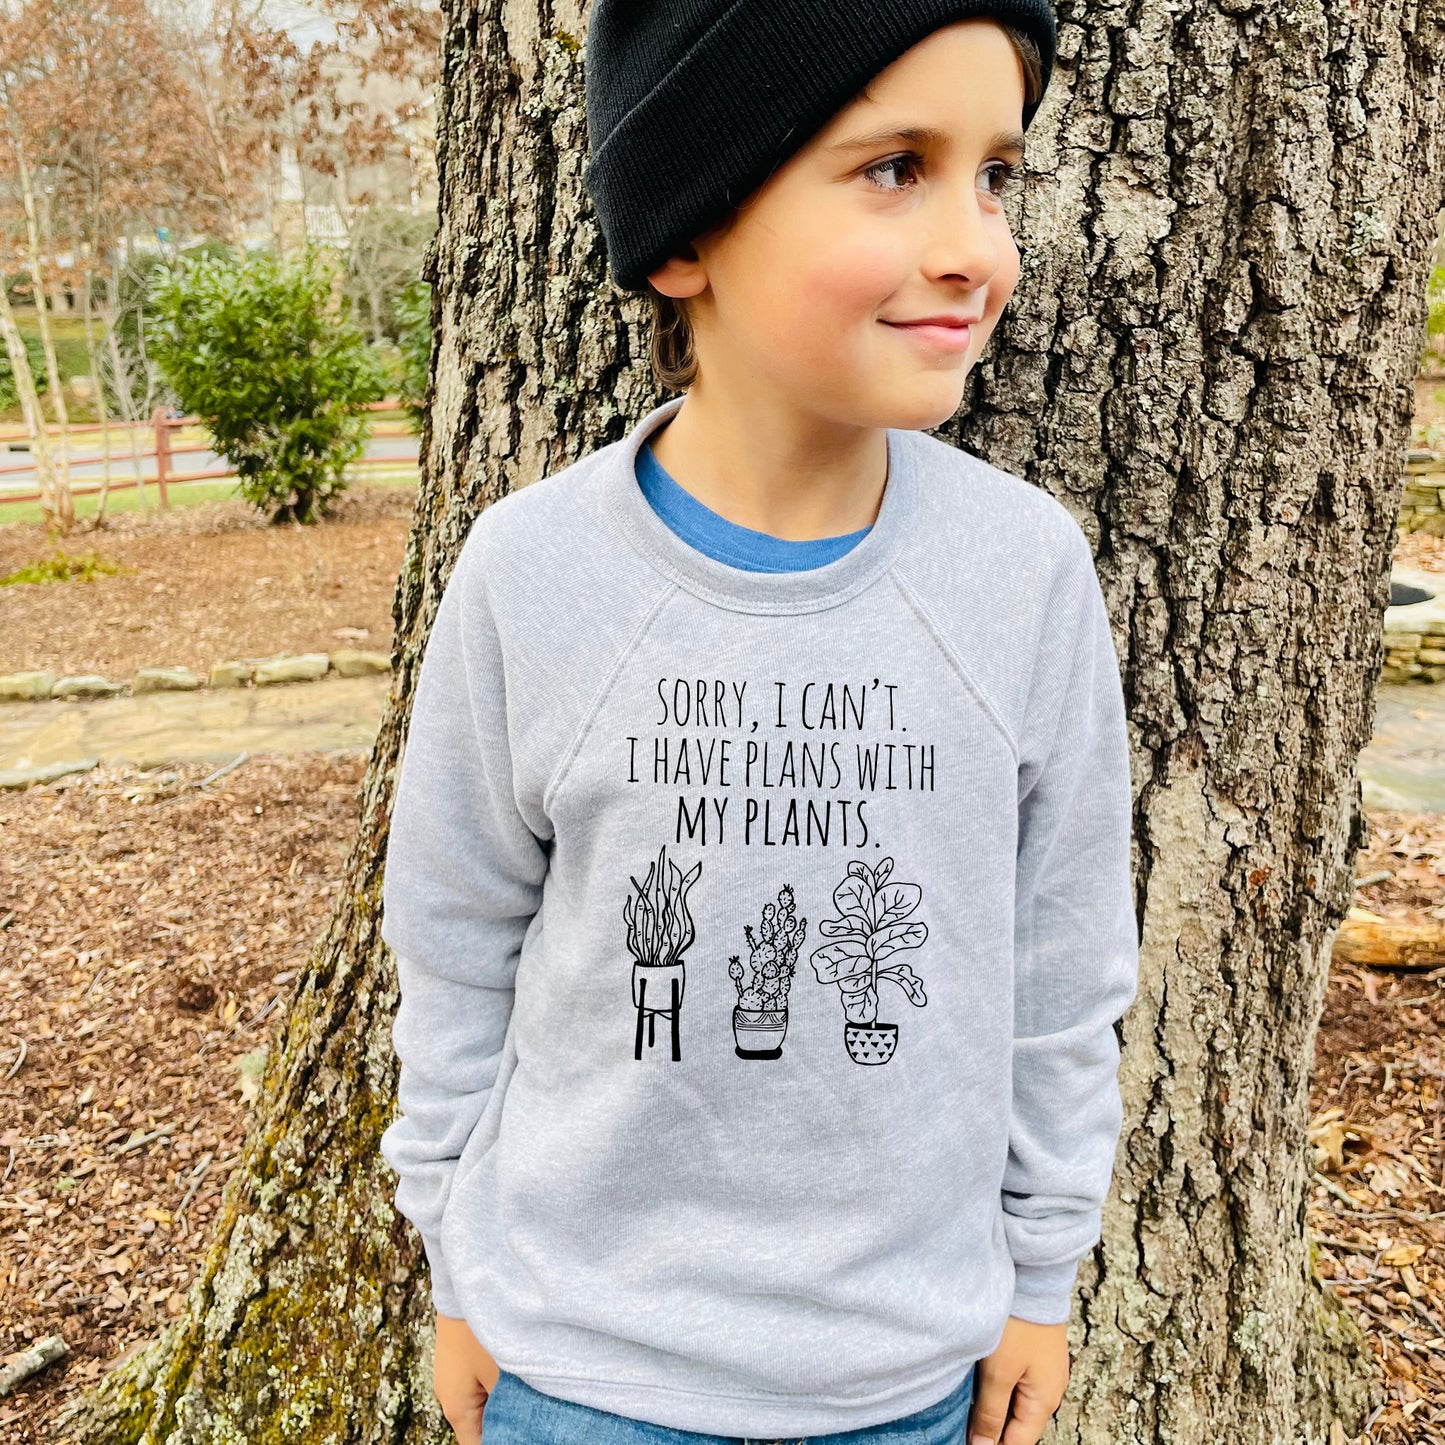 Sorry, I Can't. I Have Plans With My Plants - Kid's Sweatshirt - Heather Gray or Mauve